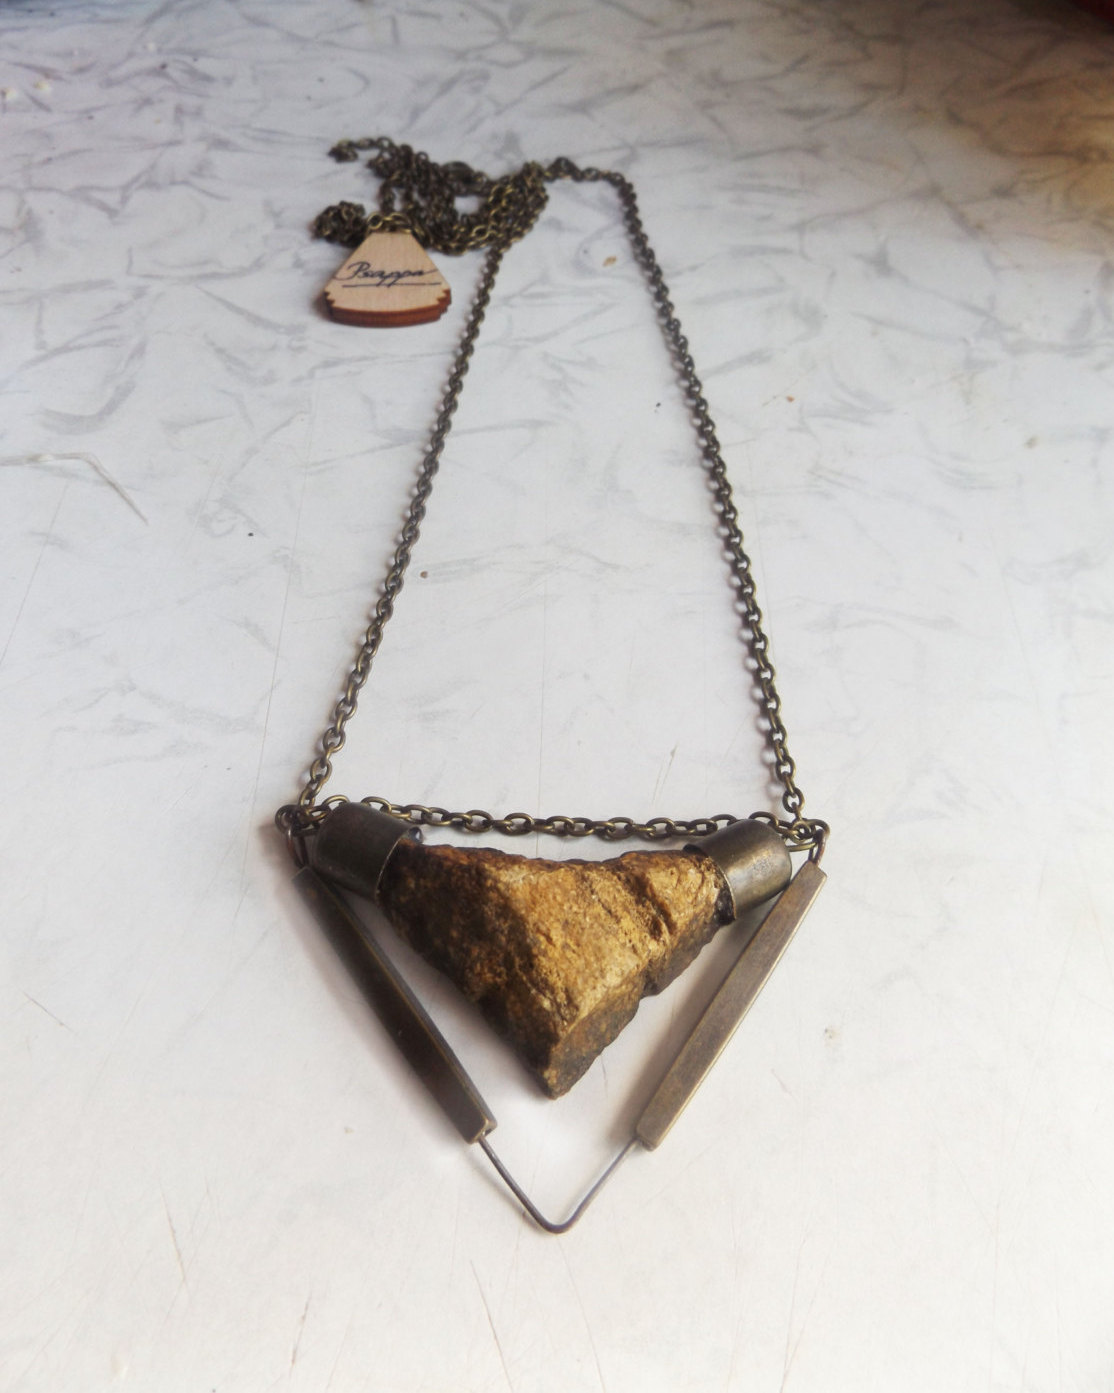 Mineral & Rough Stone Necklaces Etsy PSAPPA Jewelry